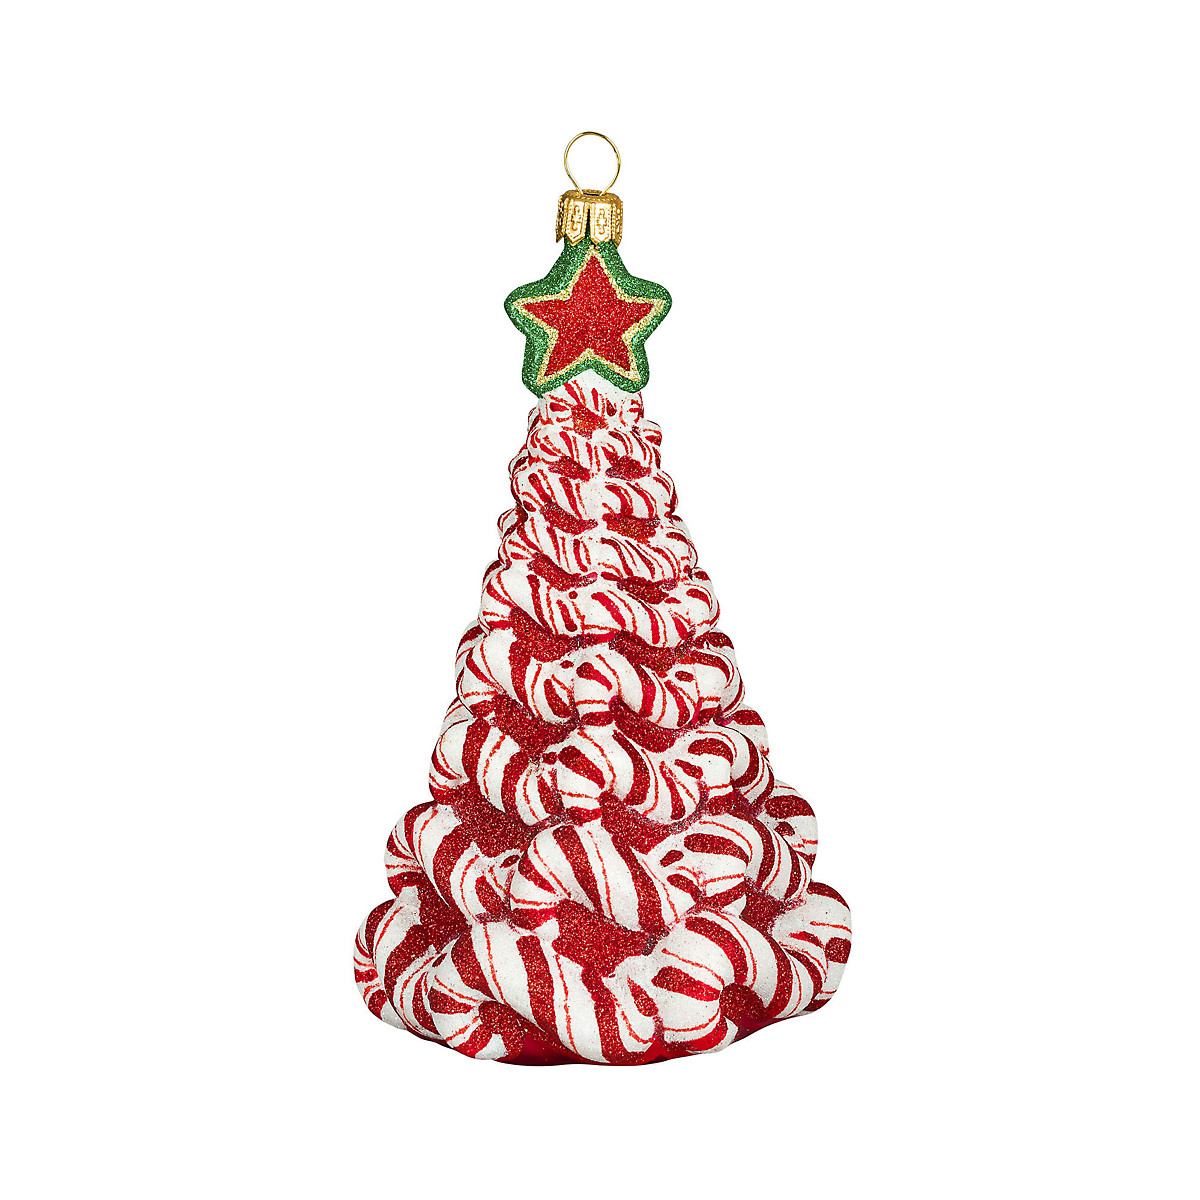 Candy Cane Christmas Tree Ornaments
 Candy Cane Twist Christmas Tree Christmas Ornament